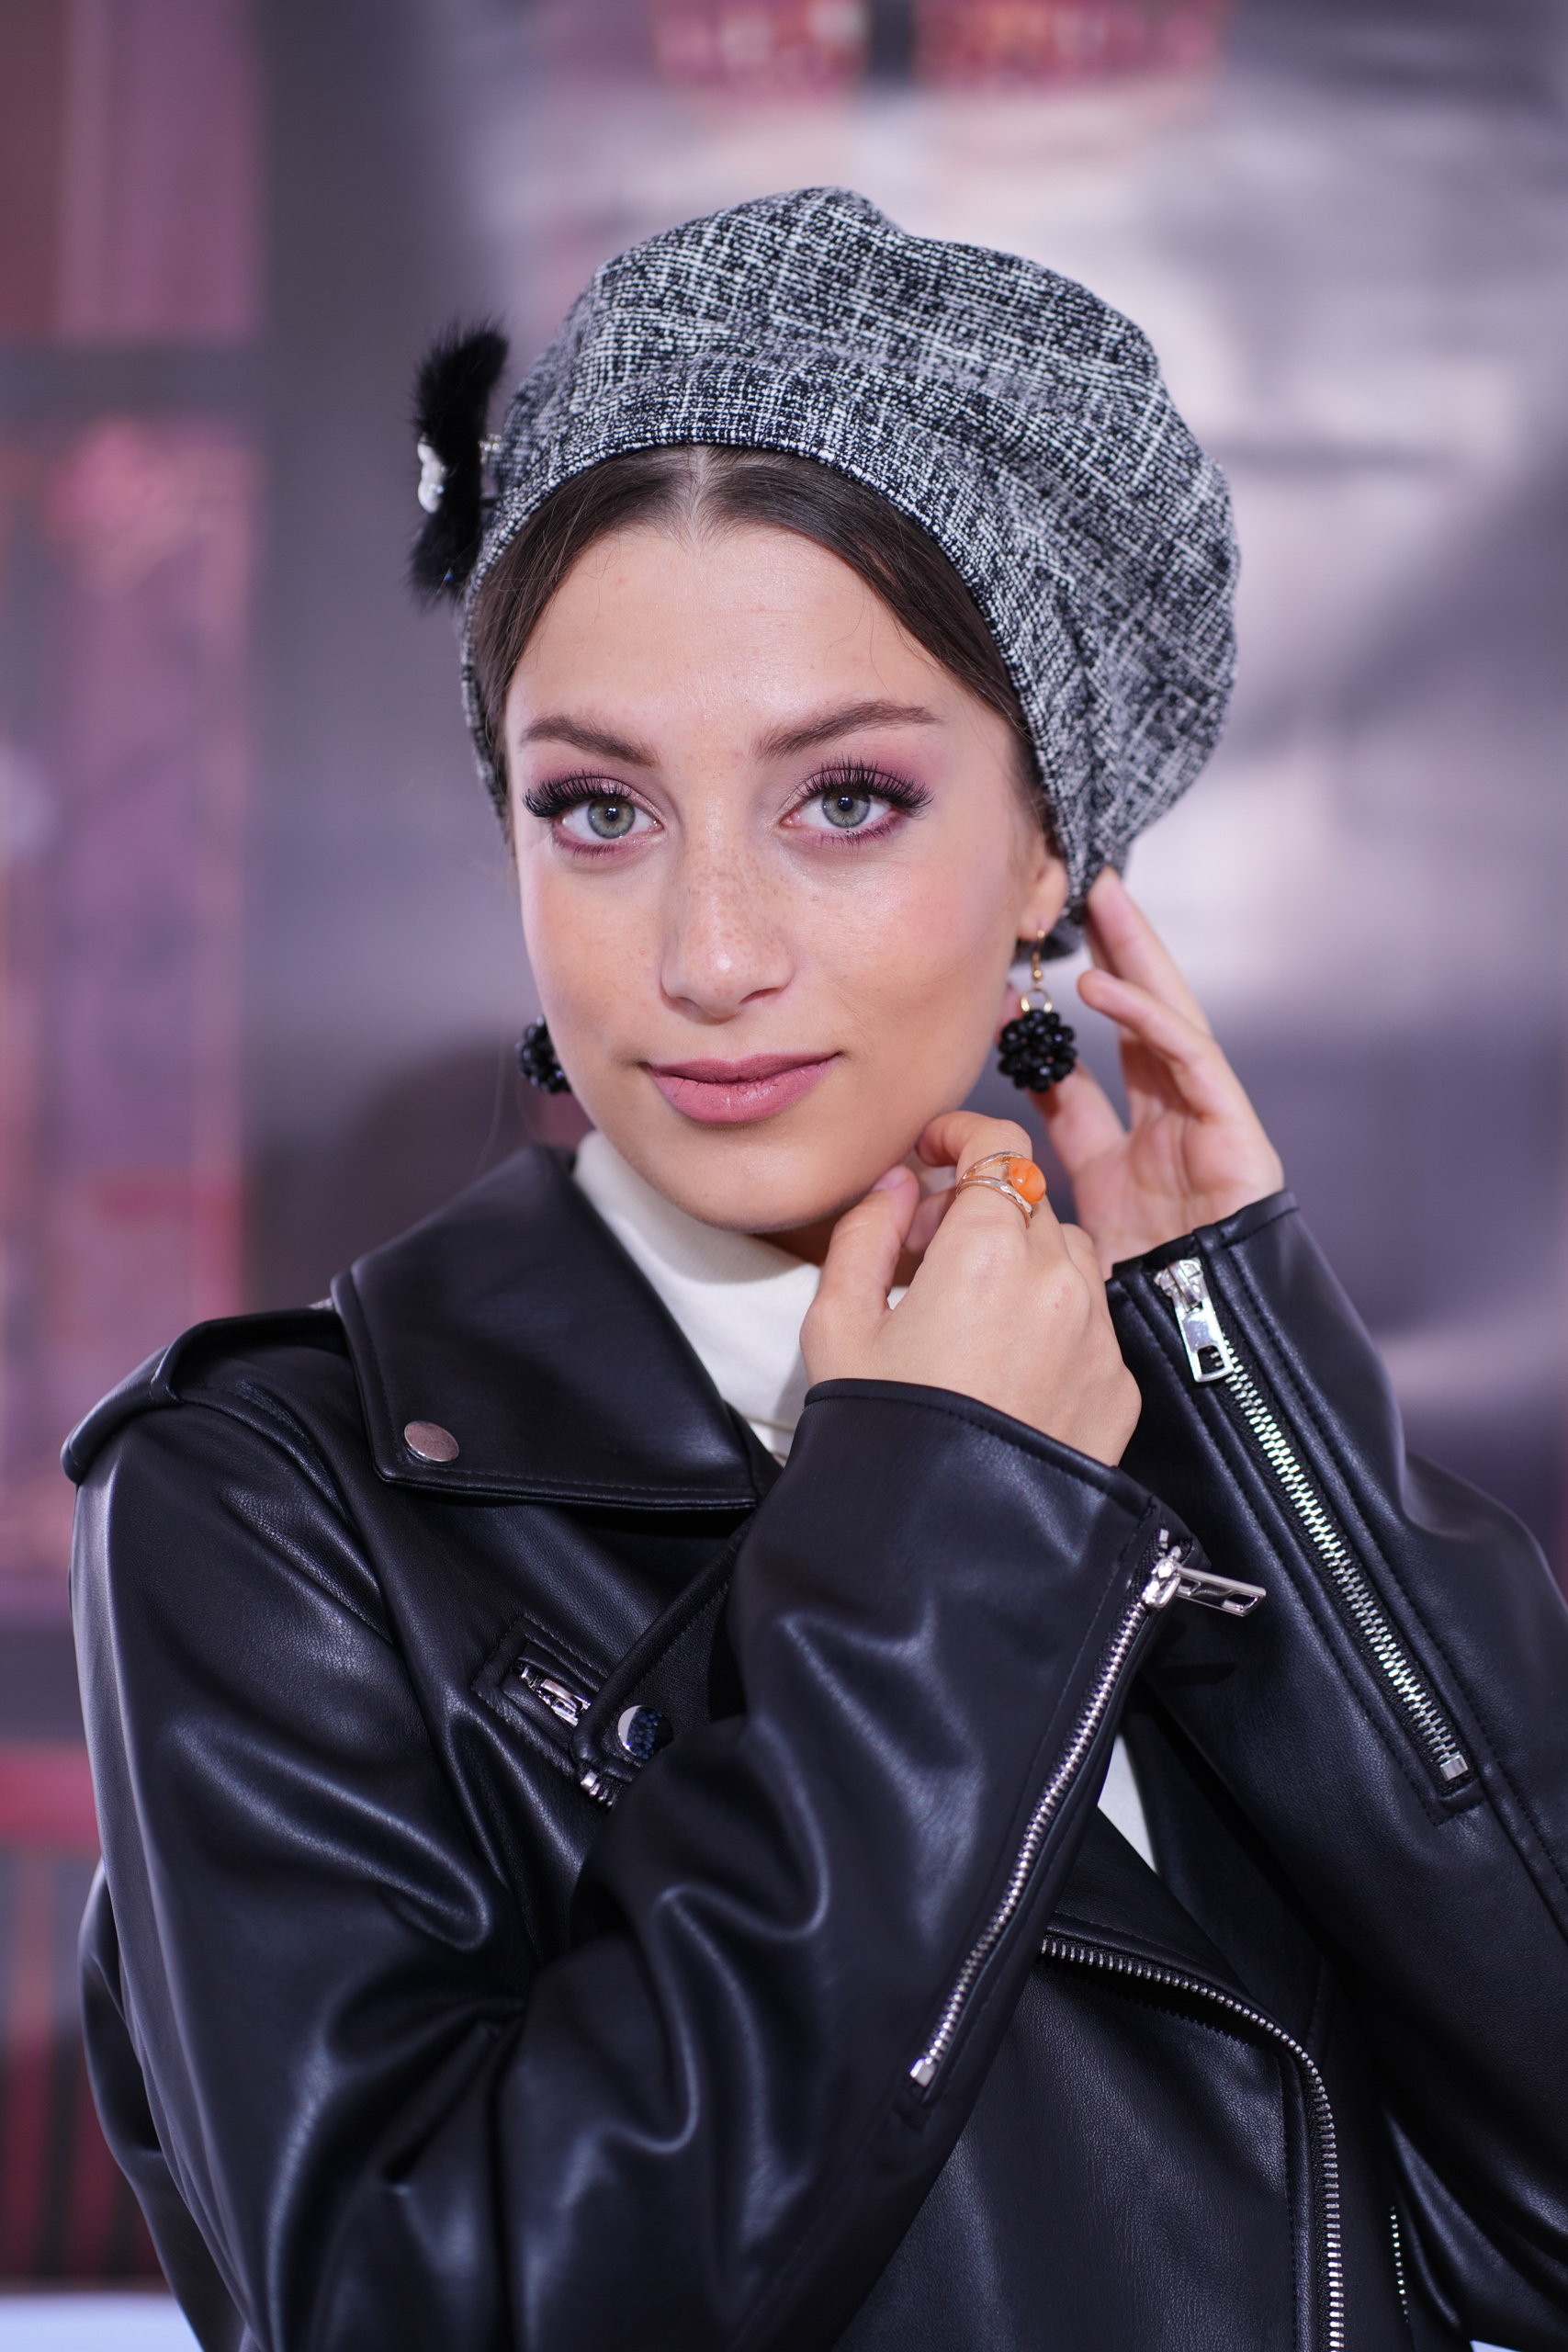 Black and white Check Beret | tweed style